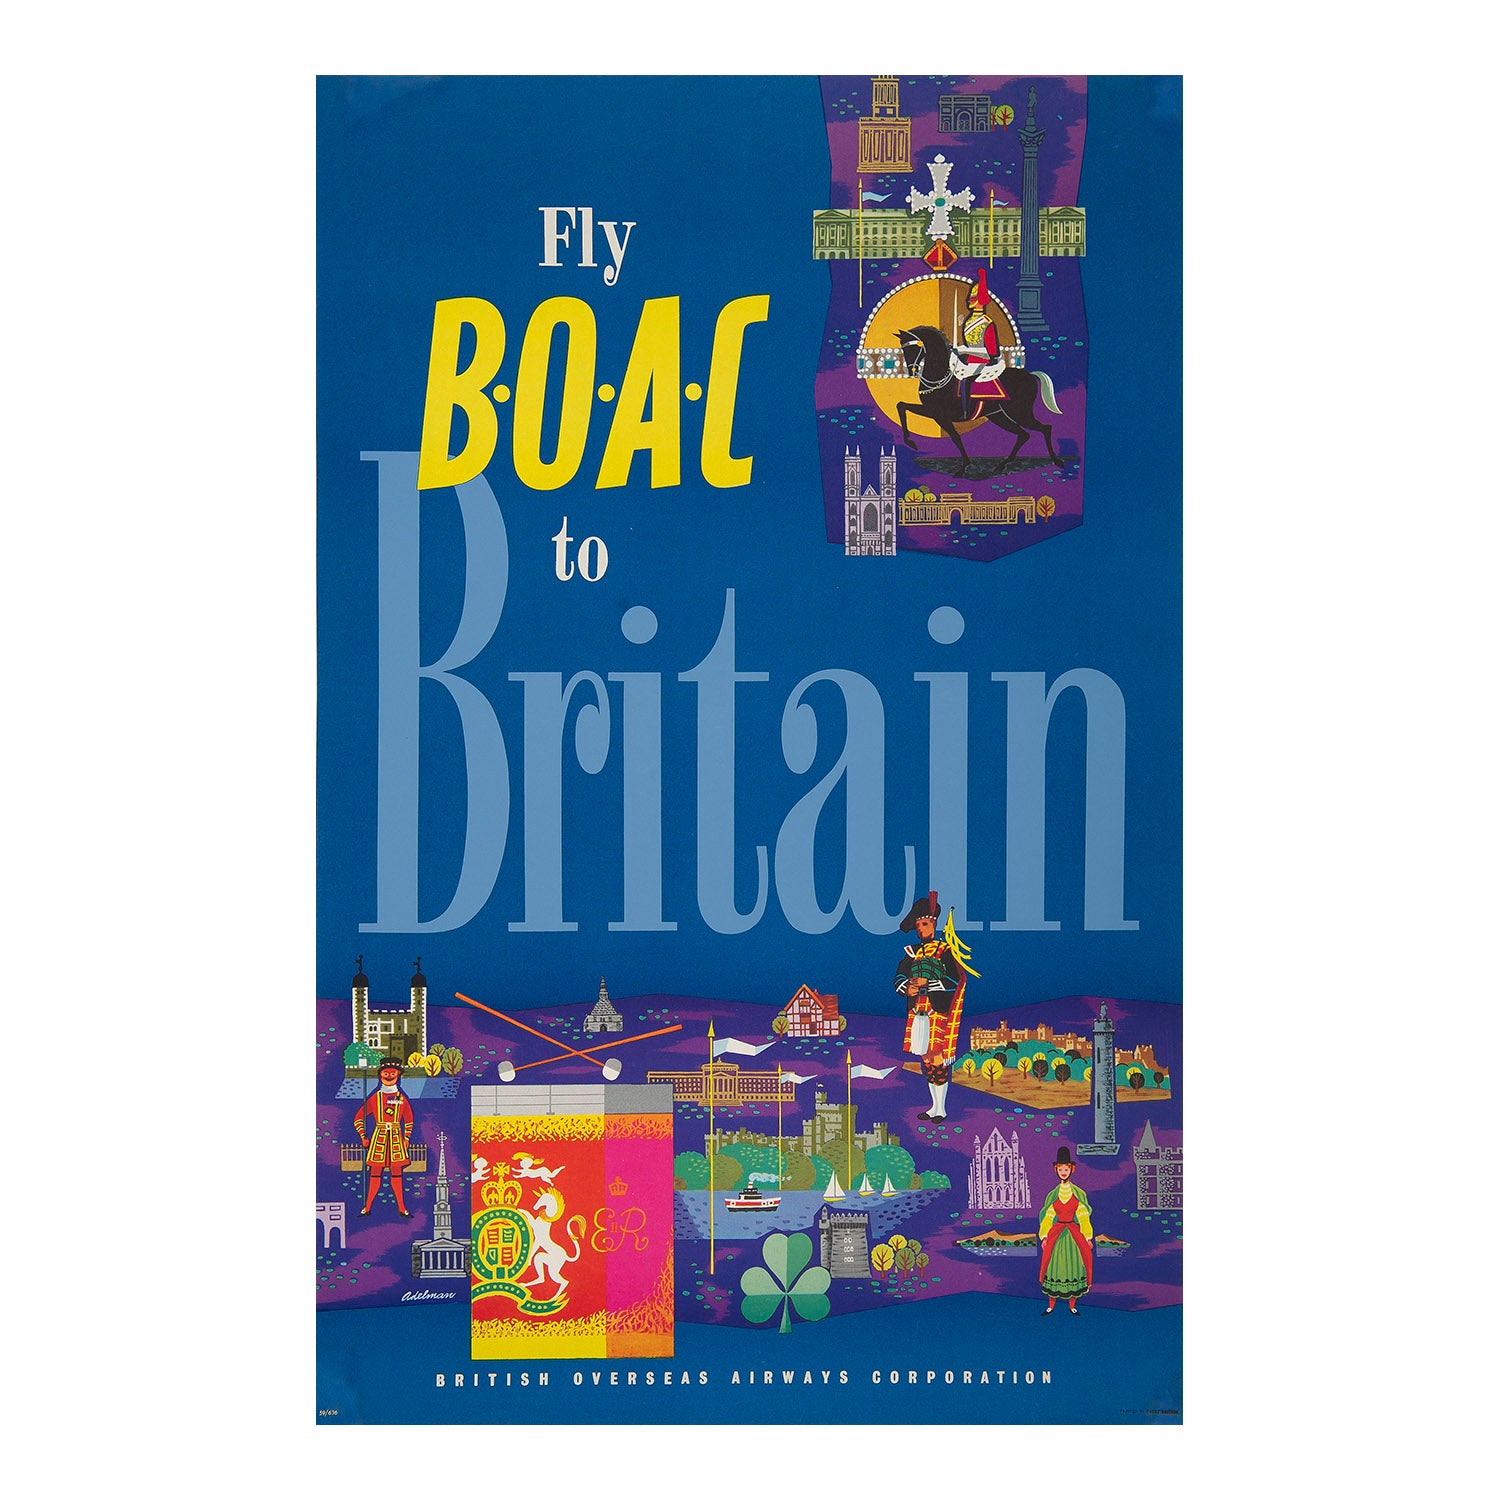 An original British Overseas Airways Corporation (BOAC) poster designed by Ivor Adelman, 1959. The colourful image shows several of Britain’s most famous landmarks, including Windsor and Edinburgh castles and Buckingham Palace.